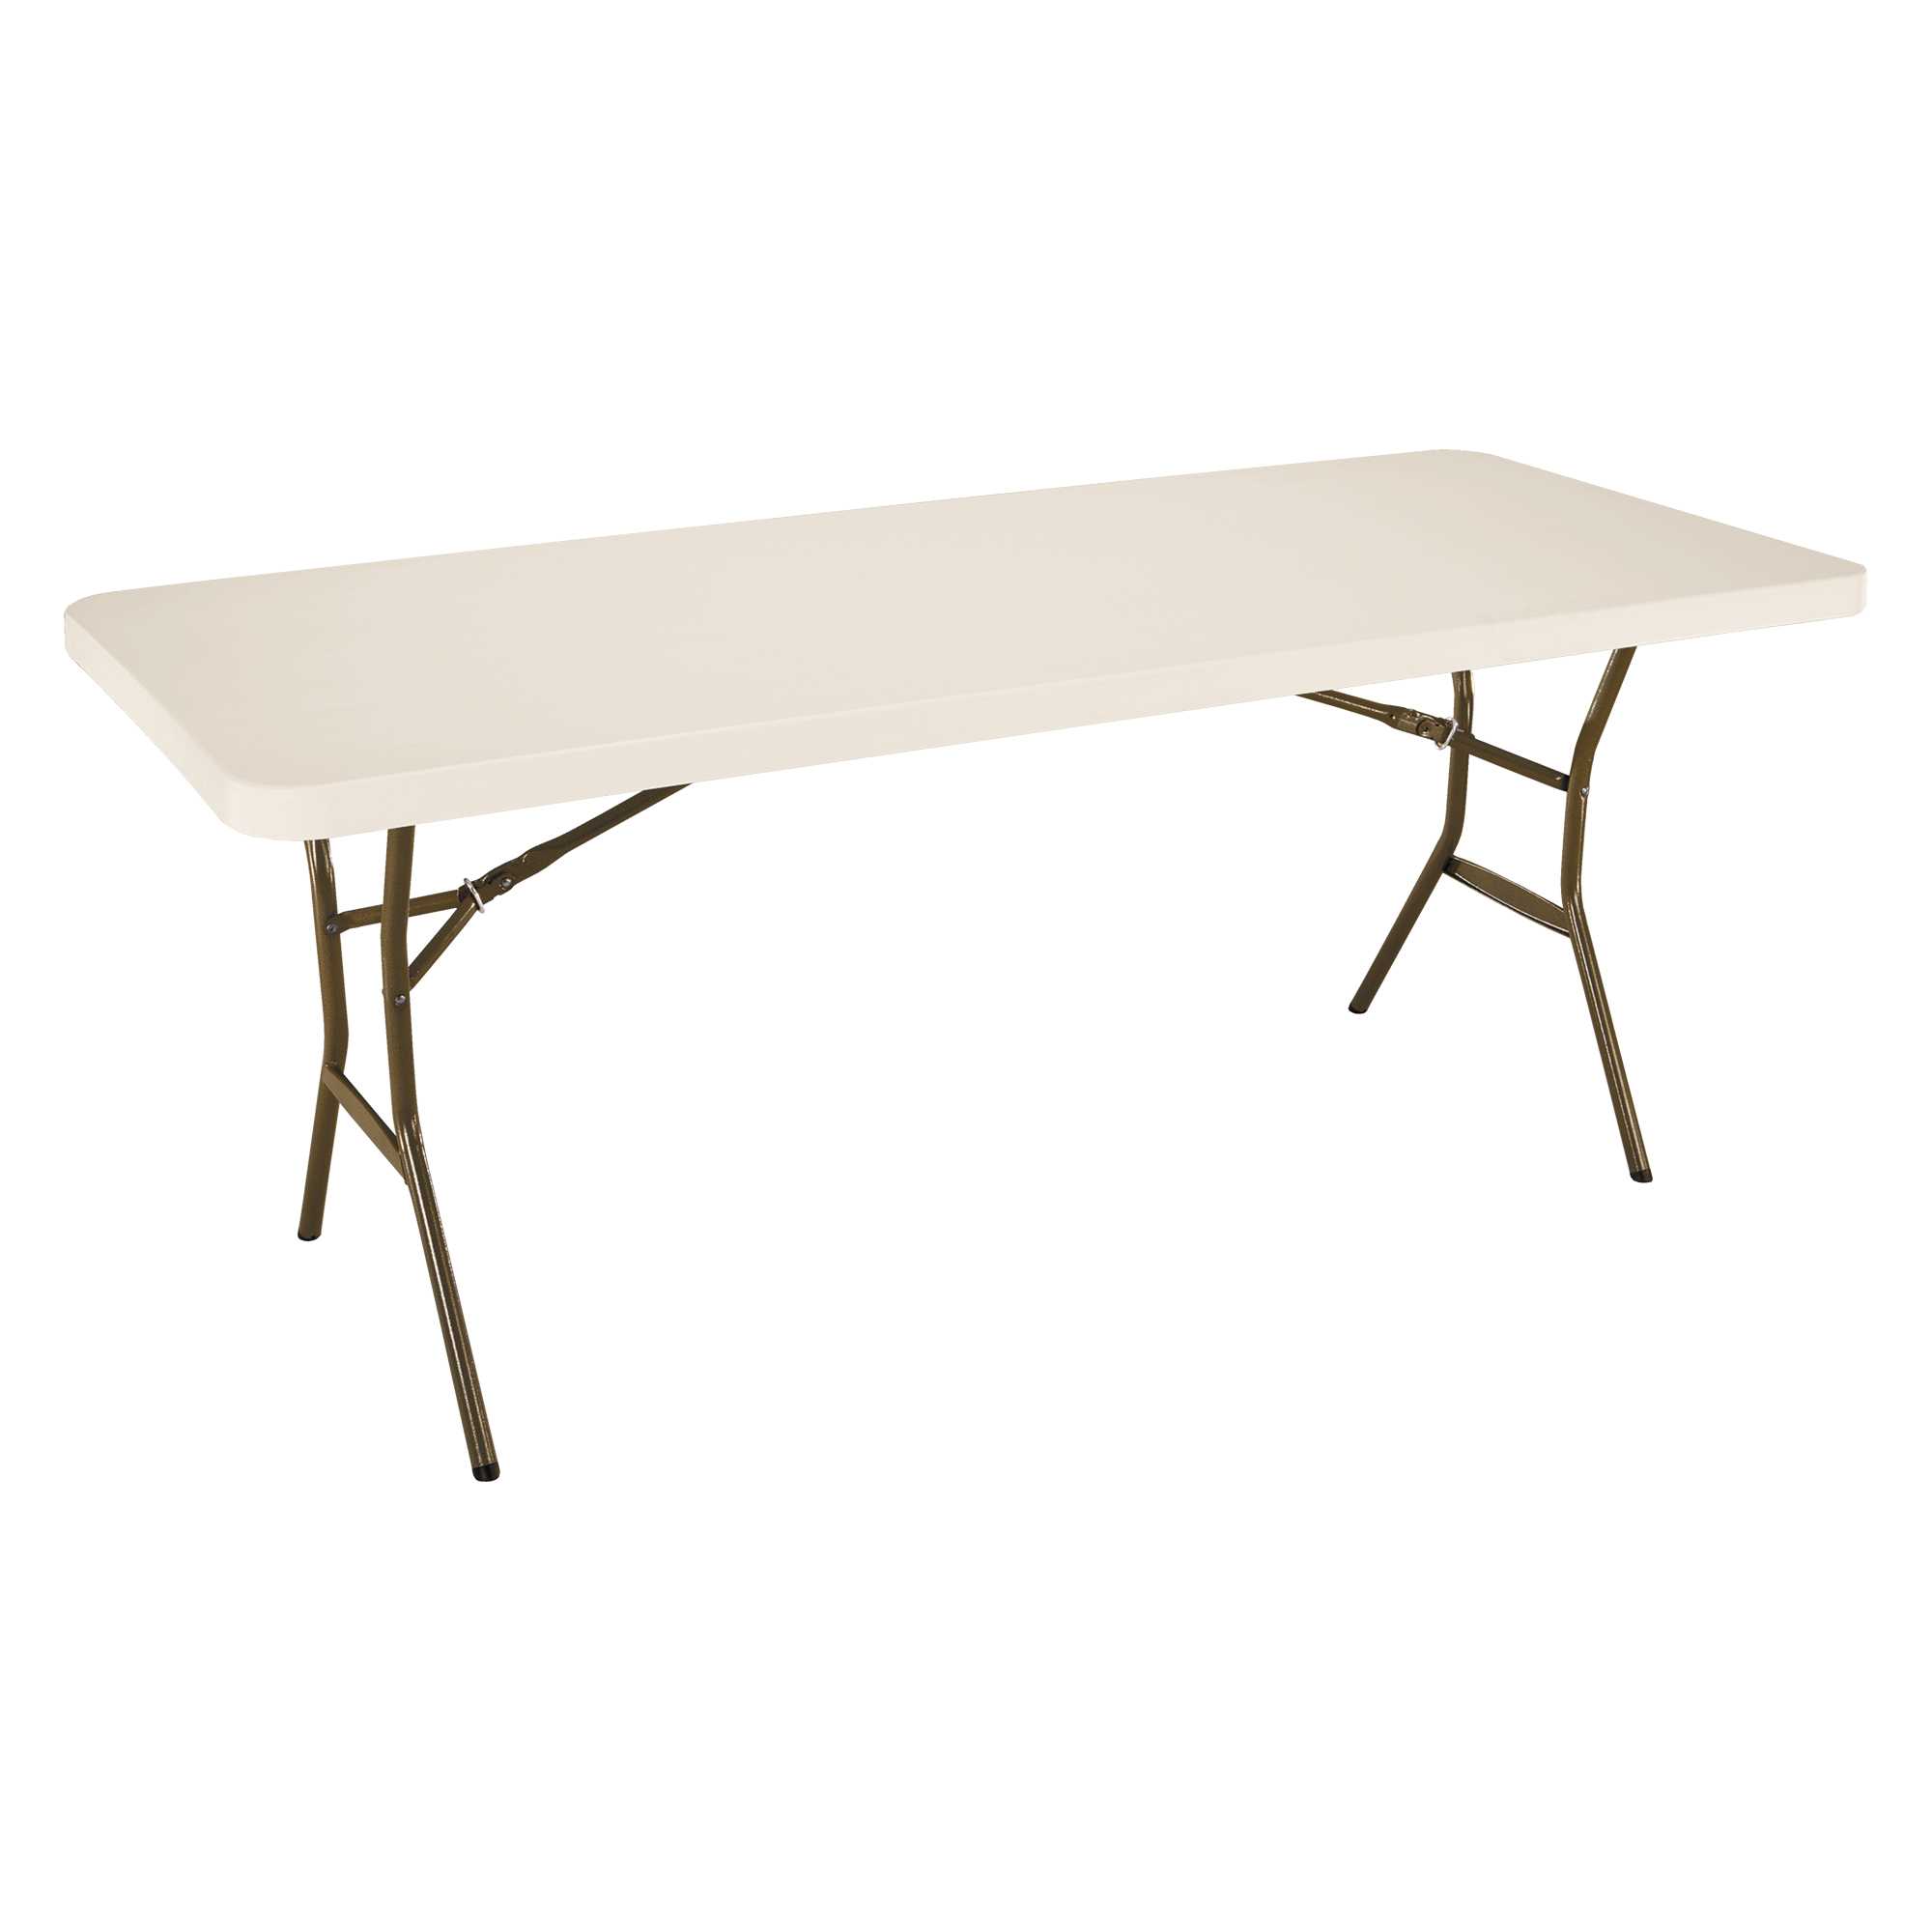 6ft table 80524